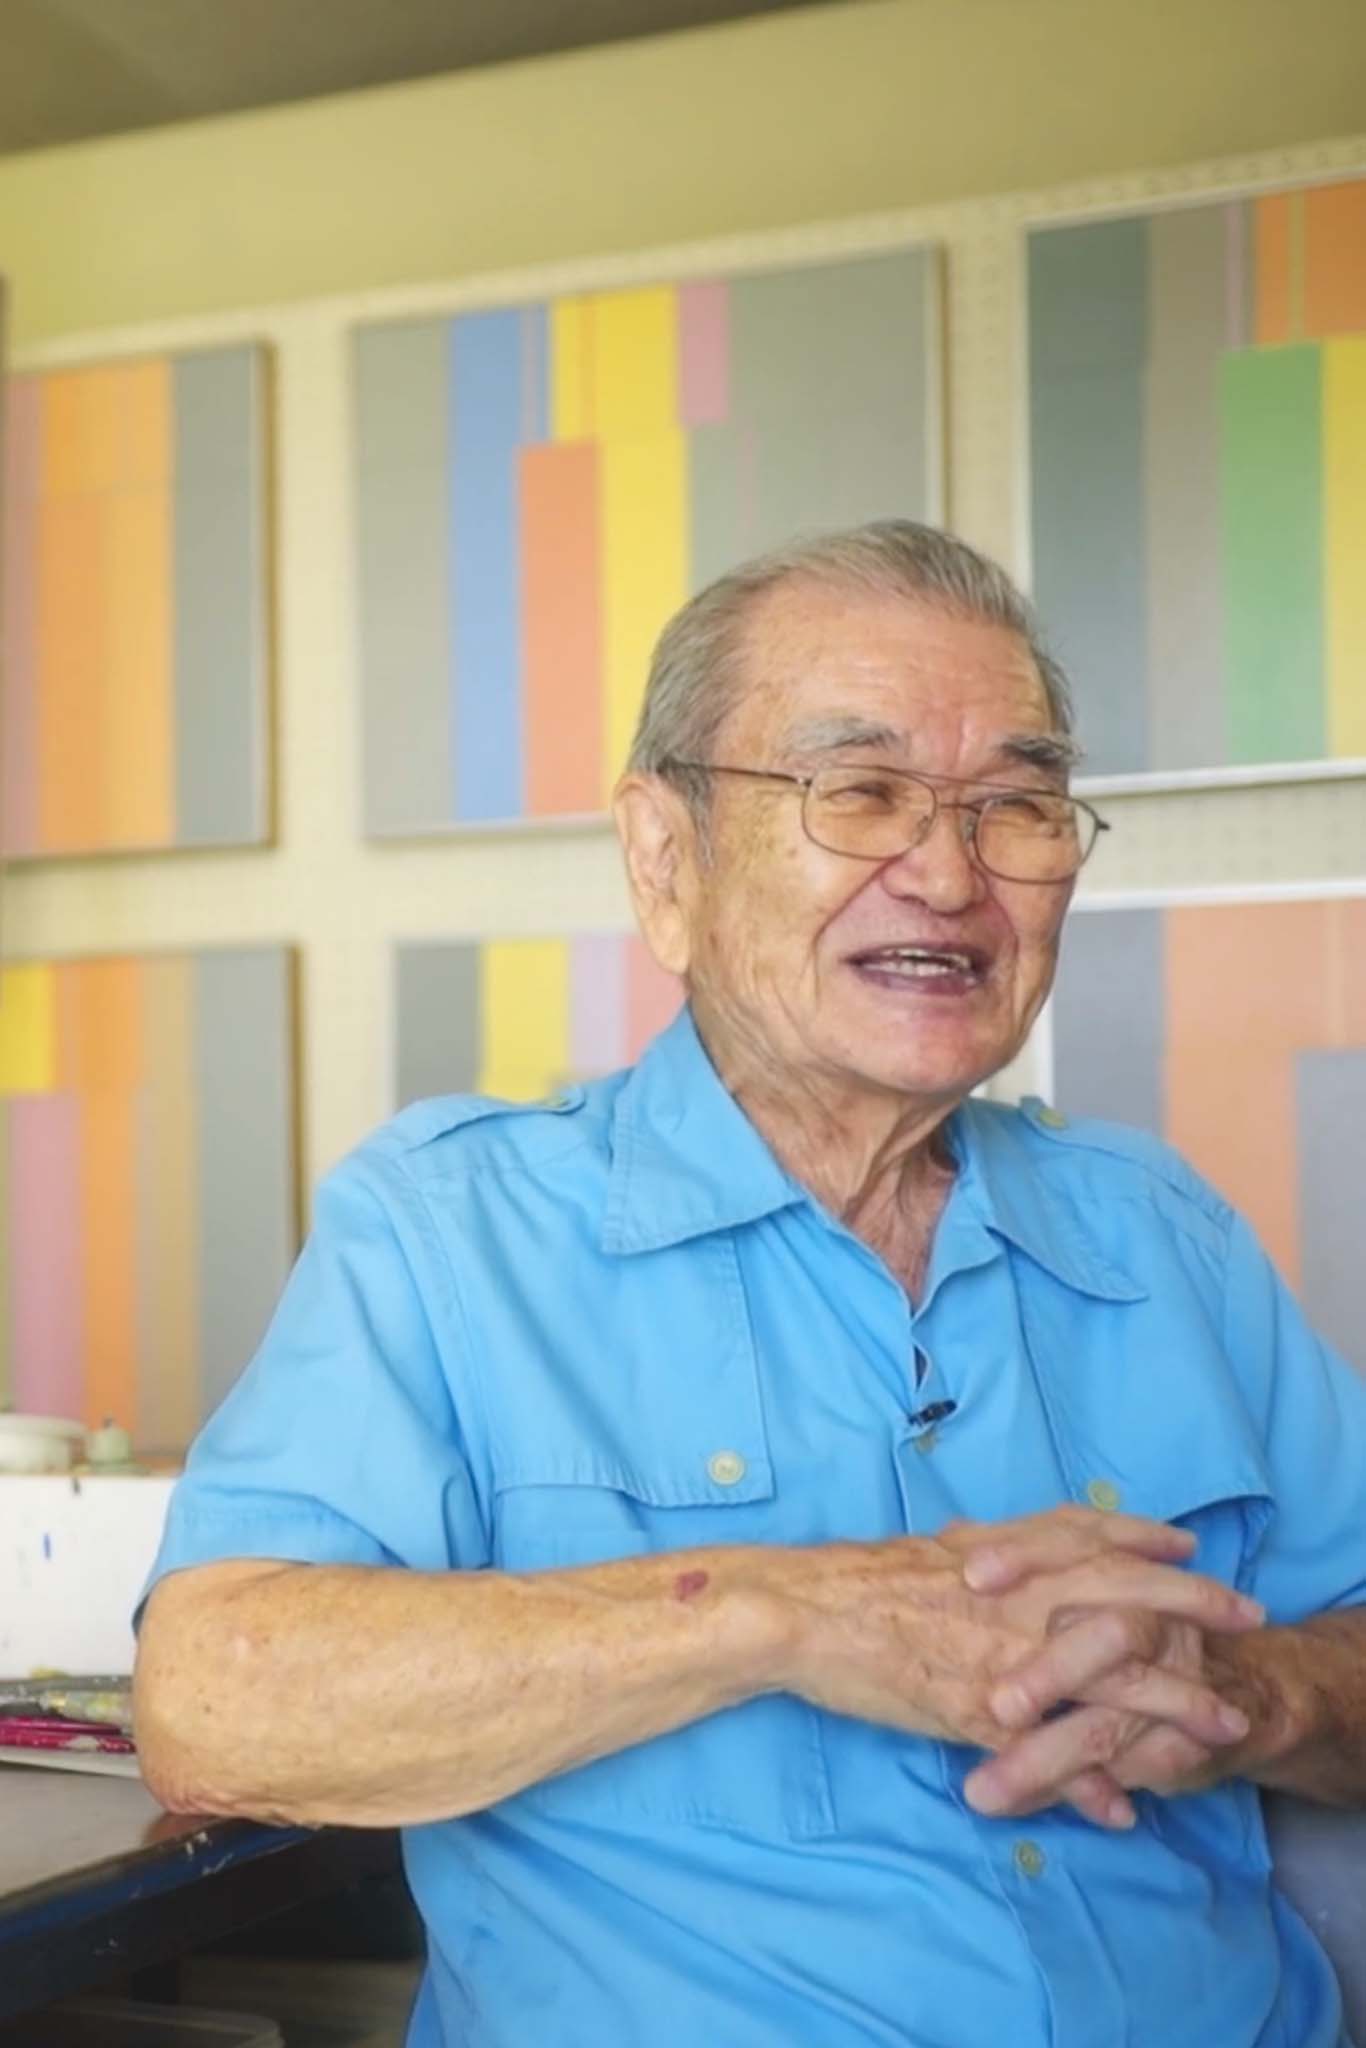 Harry Tsuchidana sits down in an interview, wearing blue, smiling with his color-block work in canvas behind him.